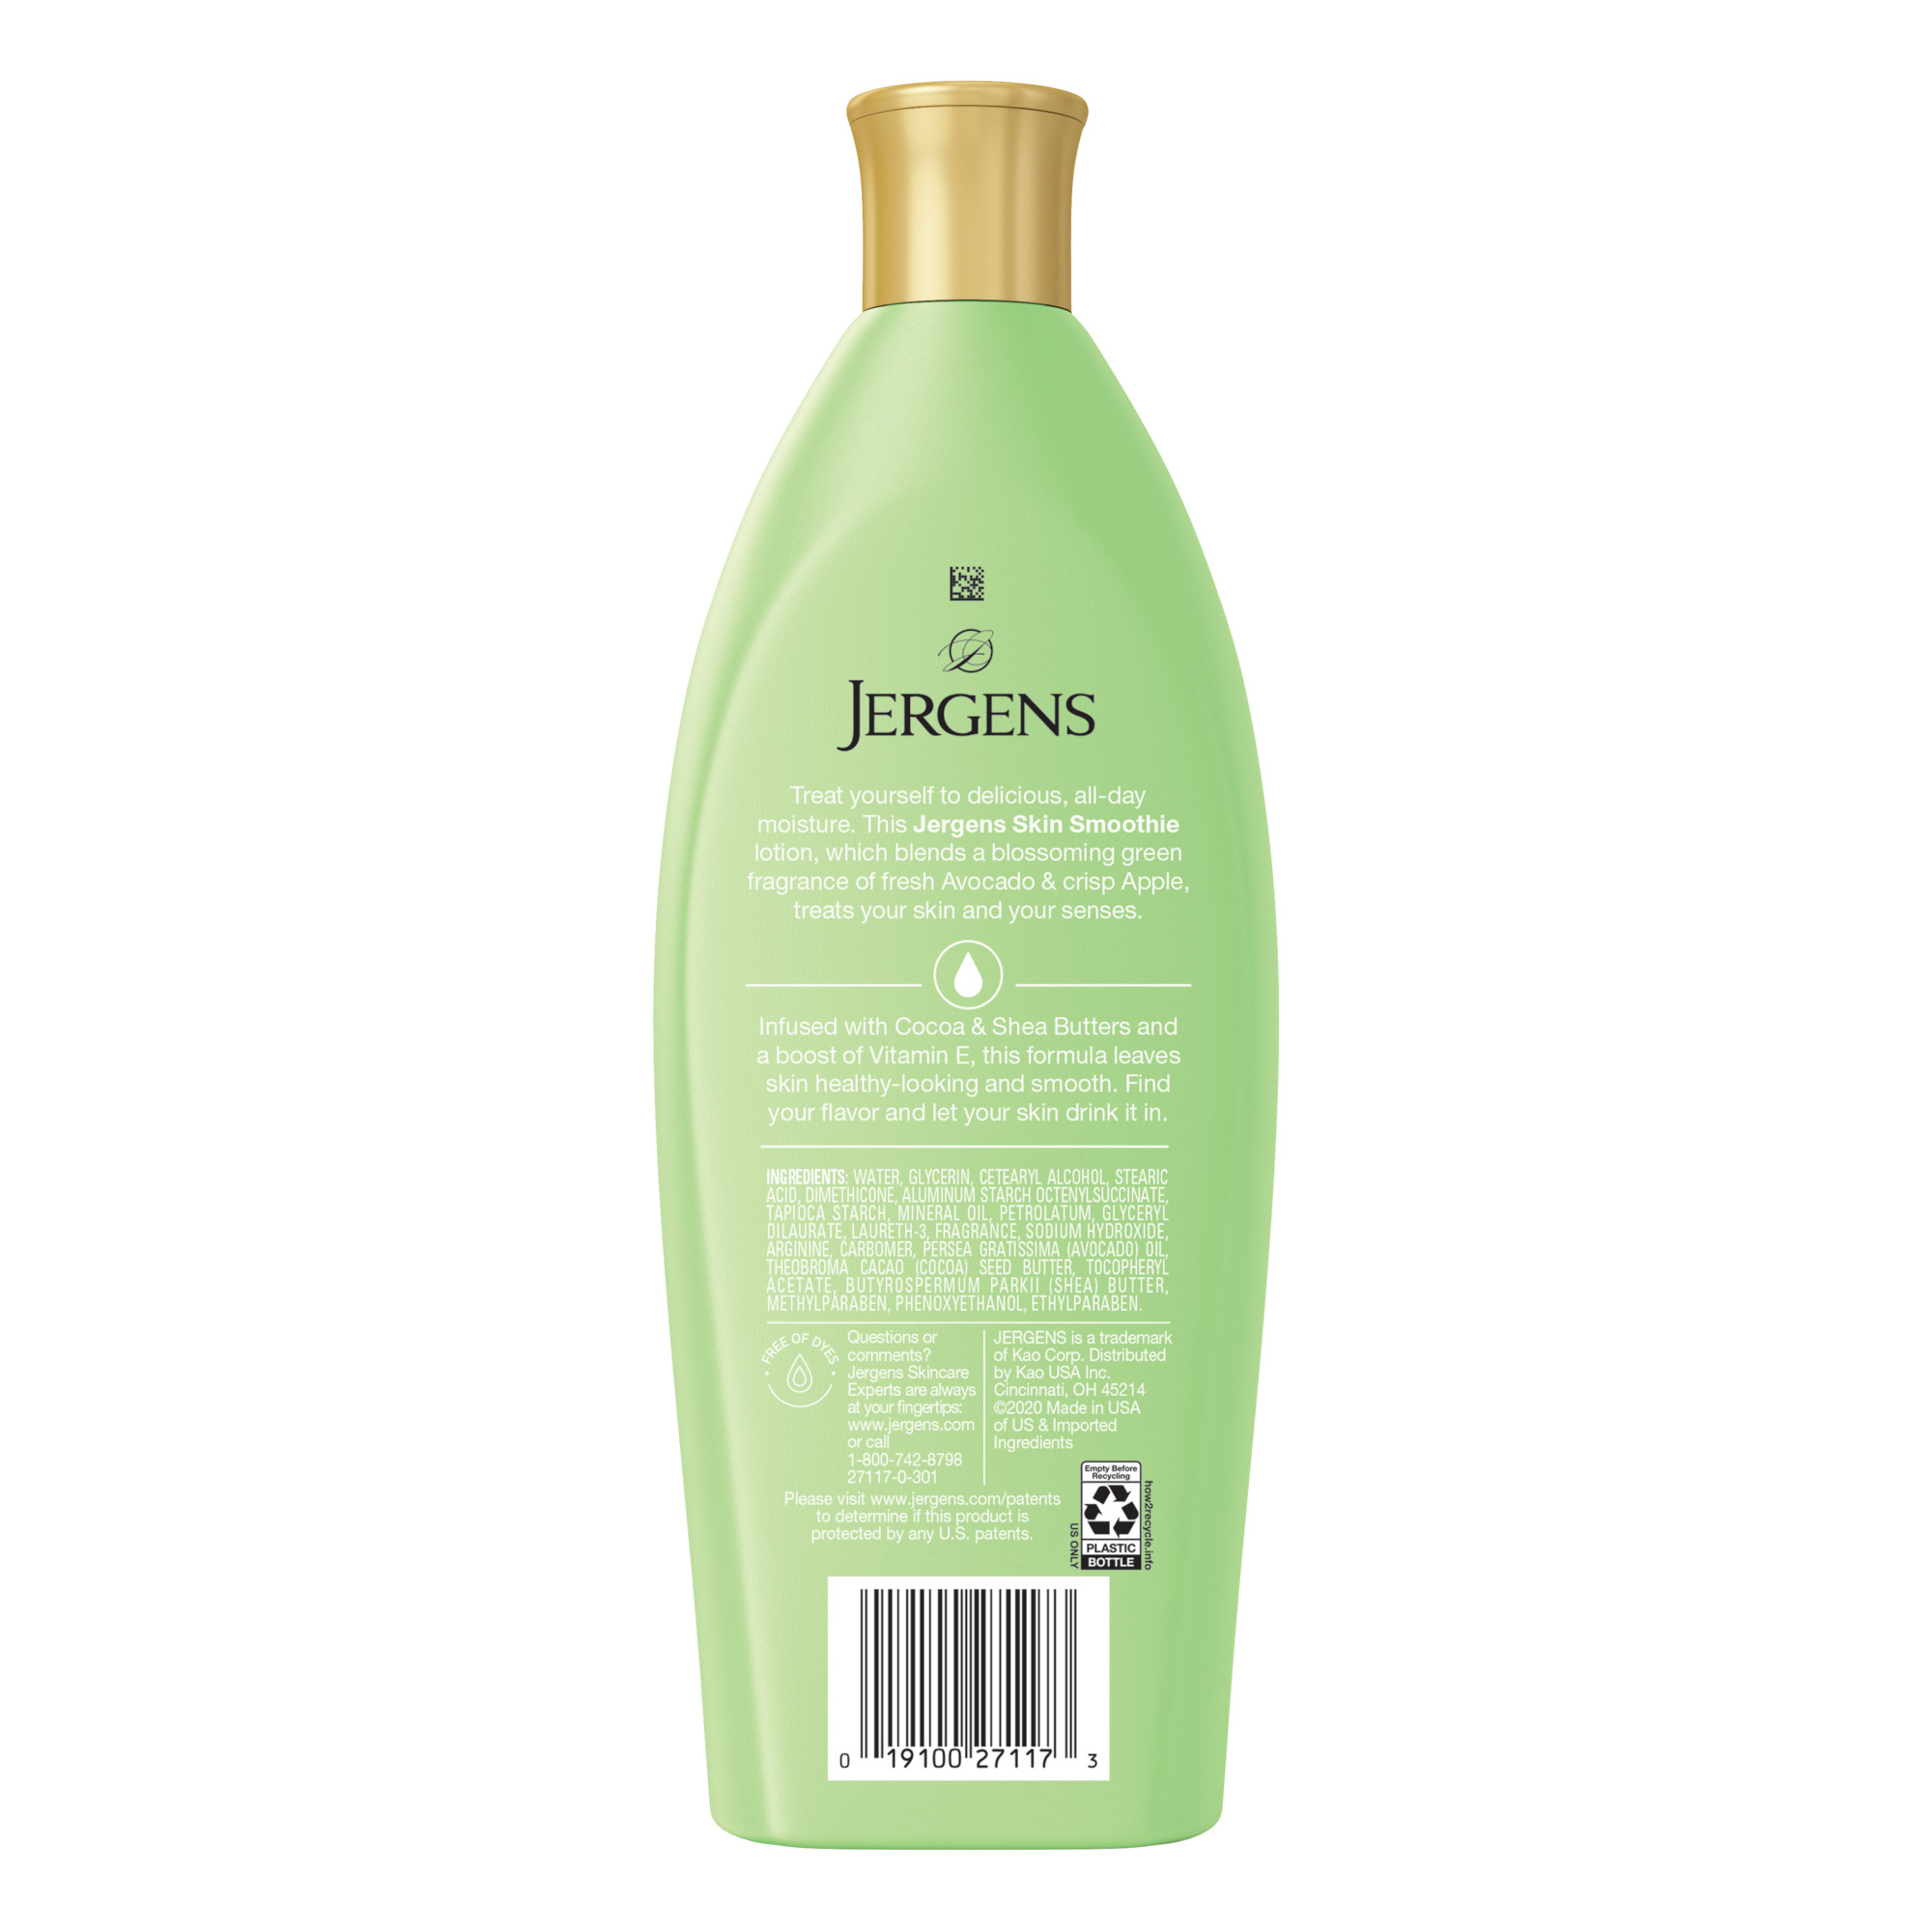 Jergens Skin Smoothie Avocado & Apple Scented Body Lotion, 10 fl oz - image 3 of 11